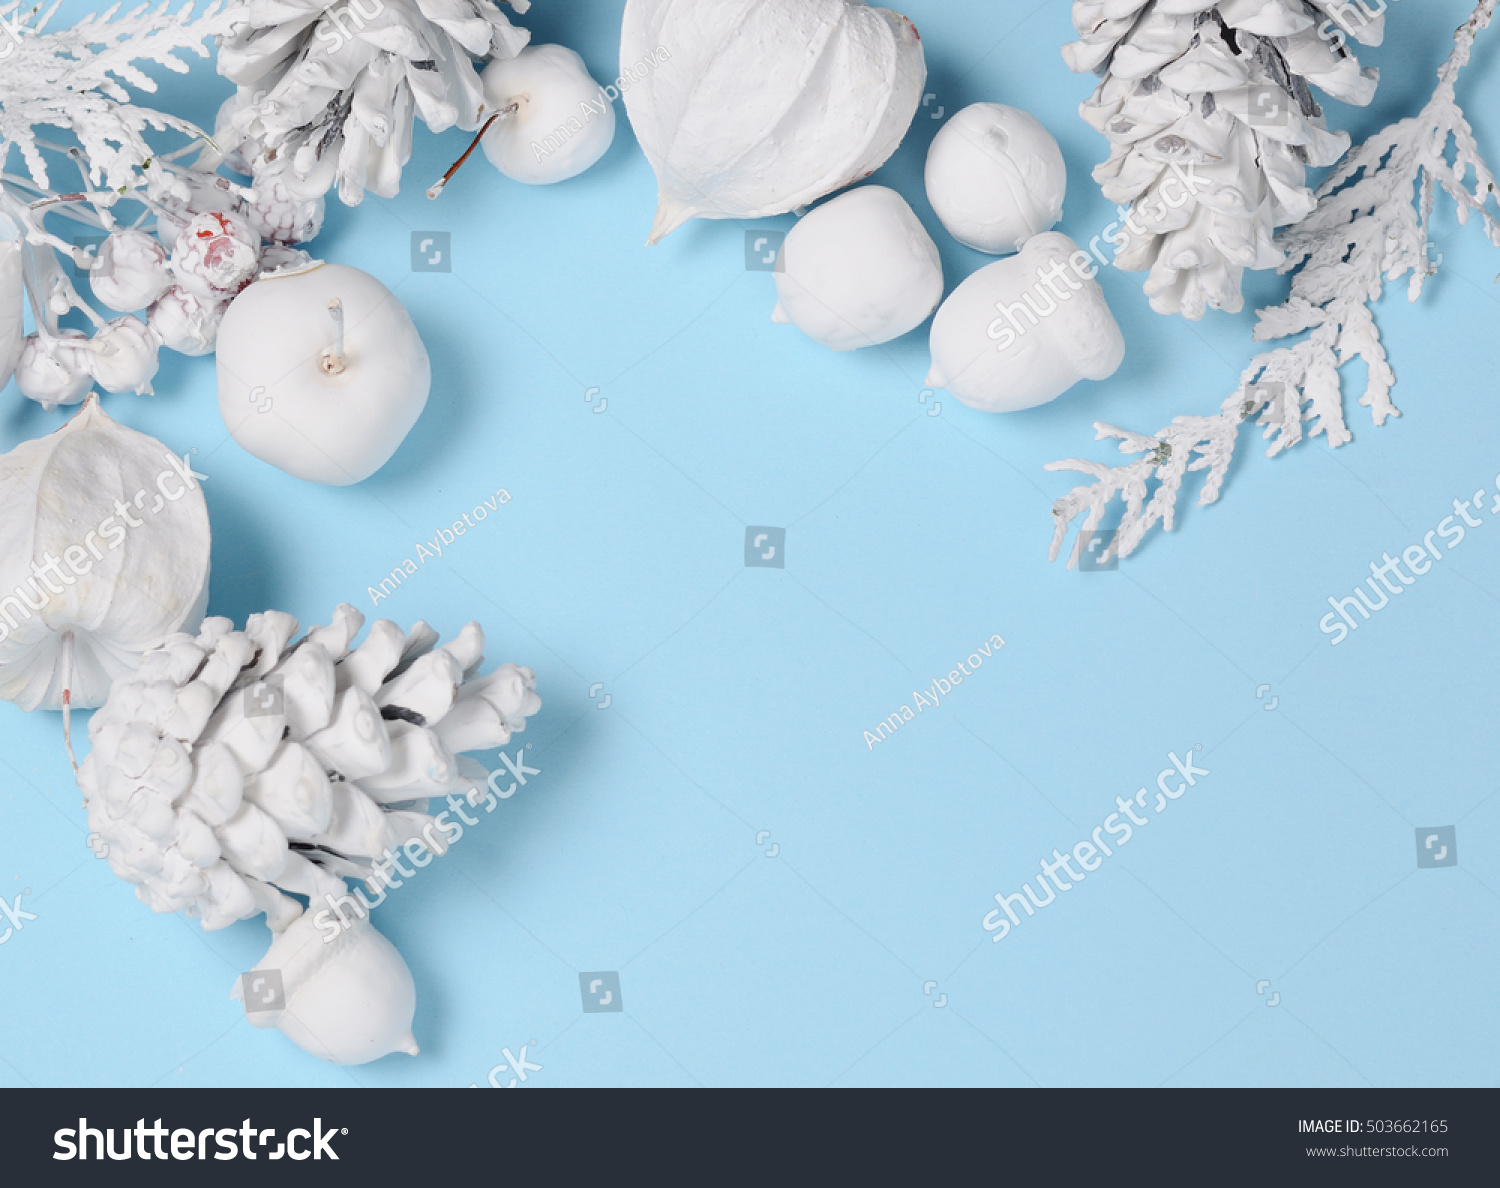 Hipster conceptual minimalist christmas and new year background. Pine cones and branches, physalis flowers. White objects on a blue background with space for greeting text #503662165